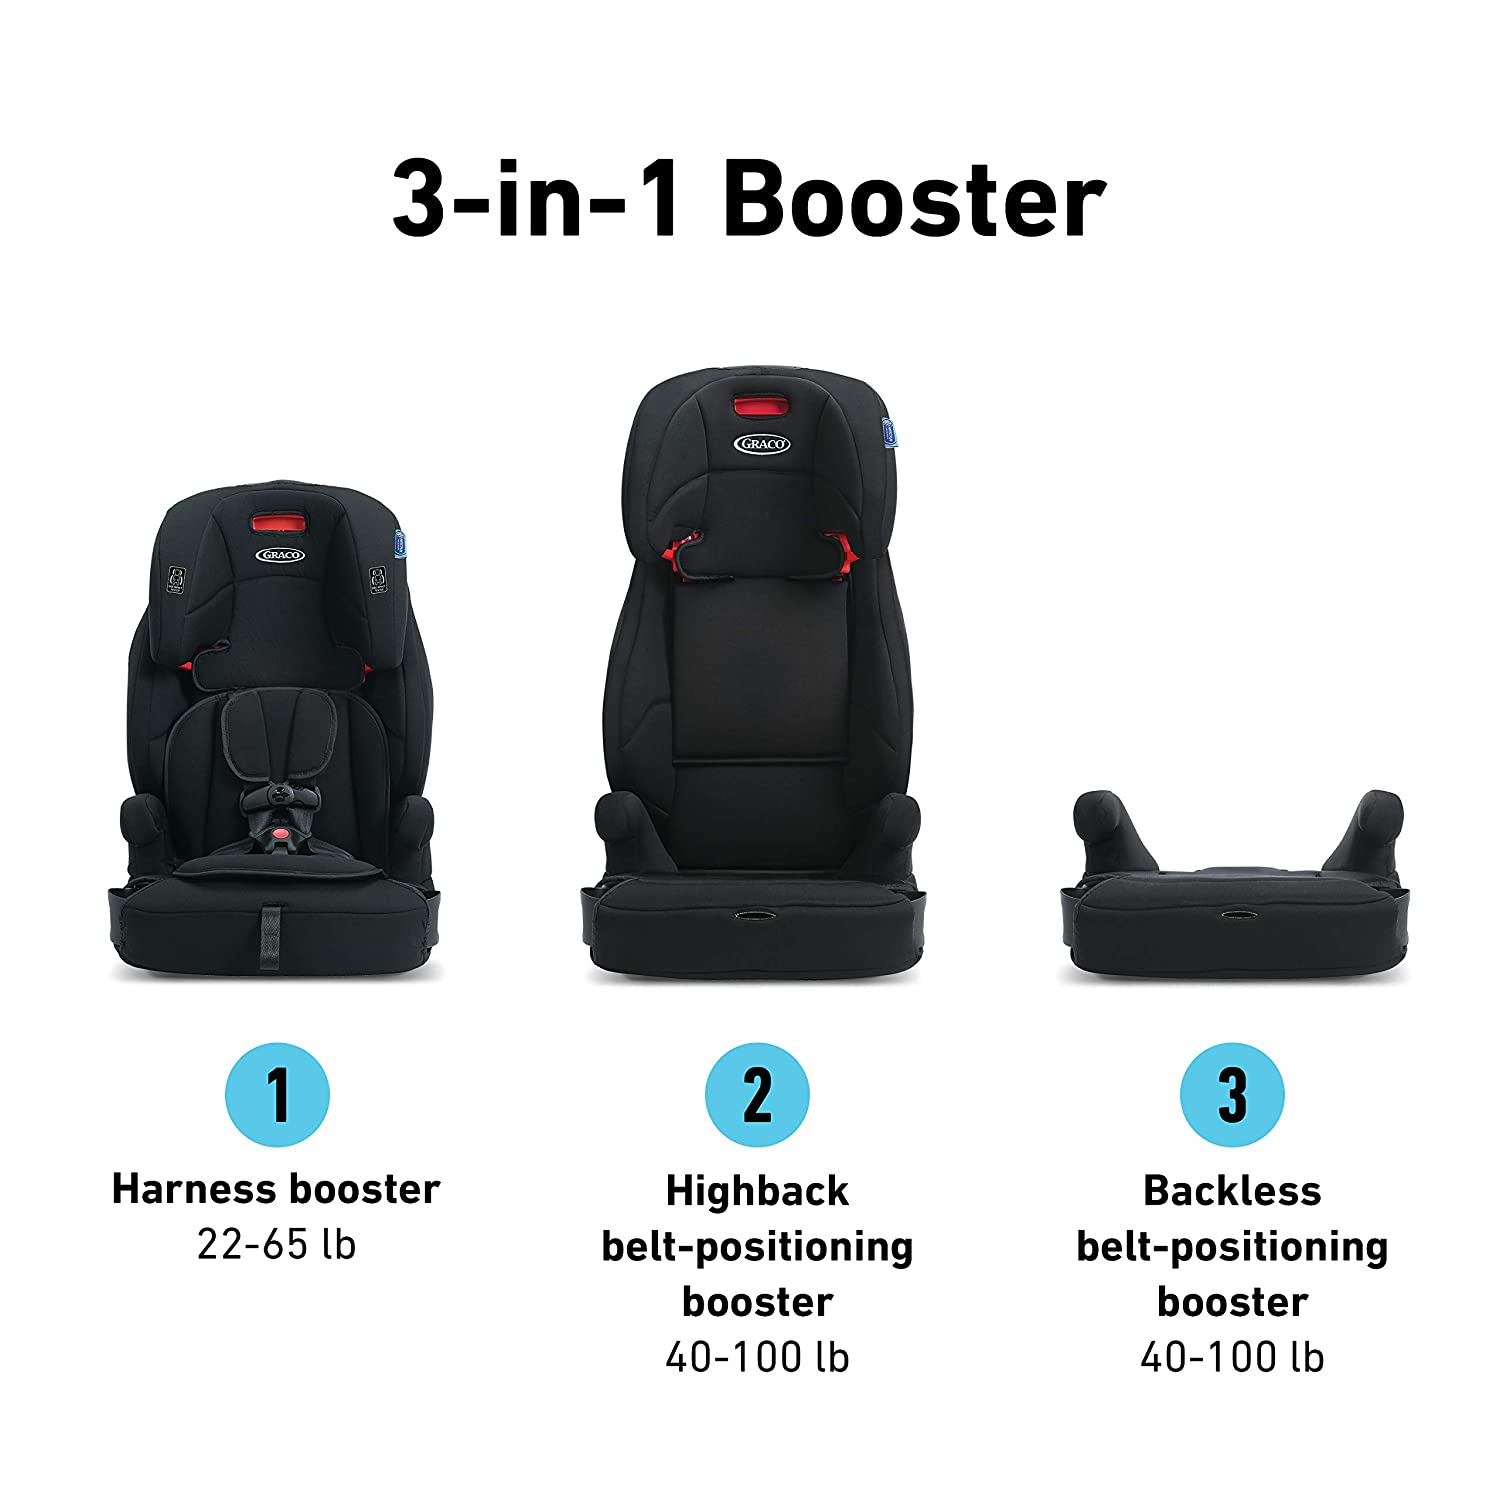 Graco Tranzitions 3-in-1 Harness Booster Car seat